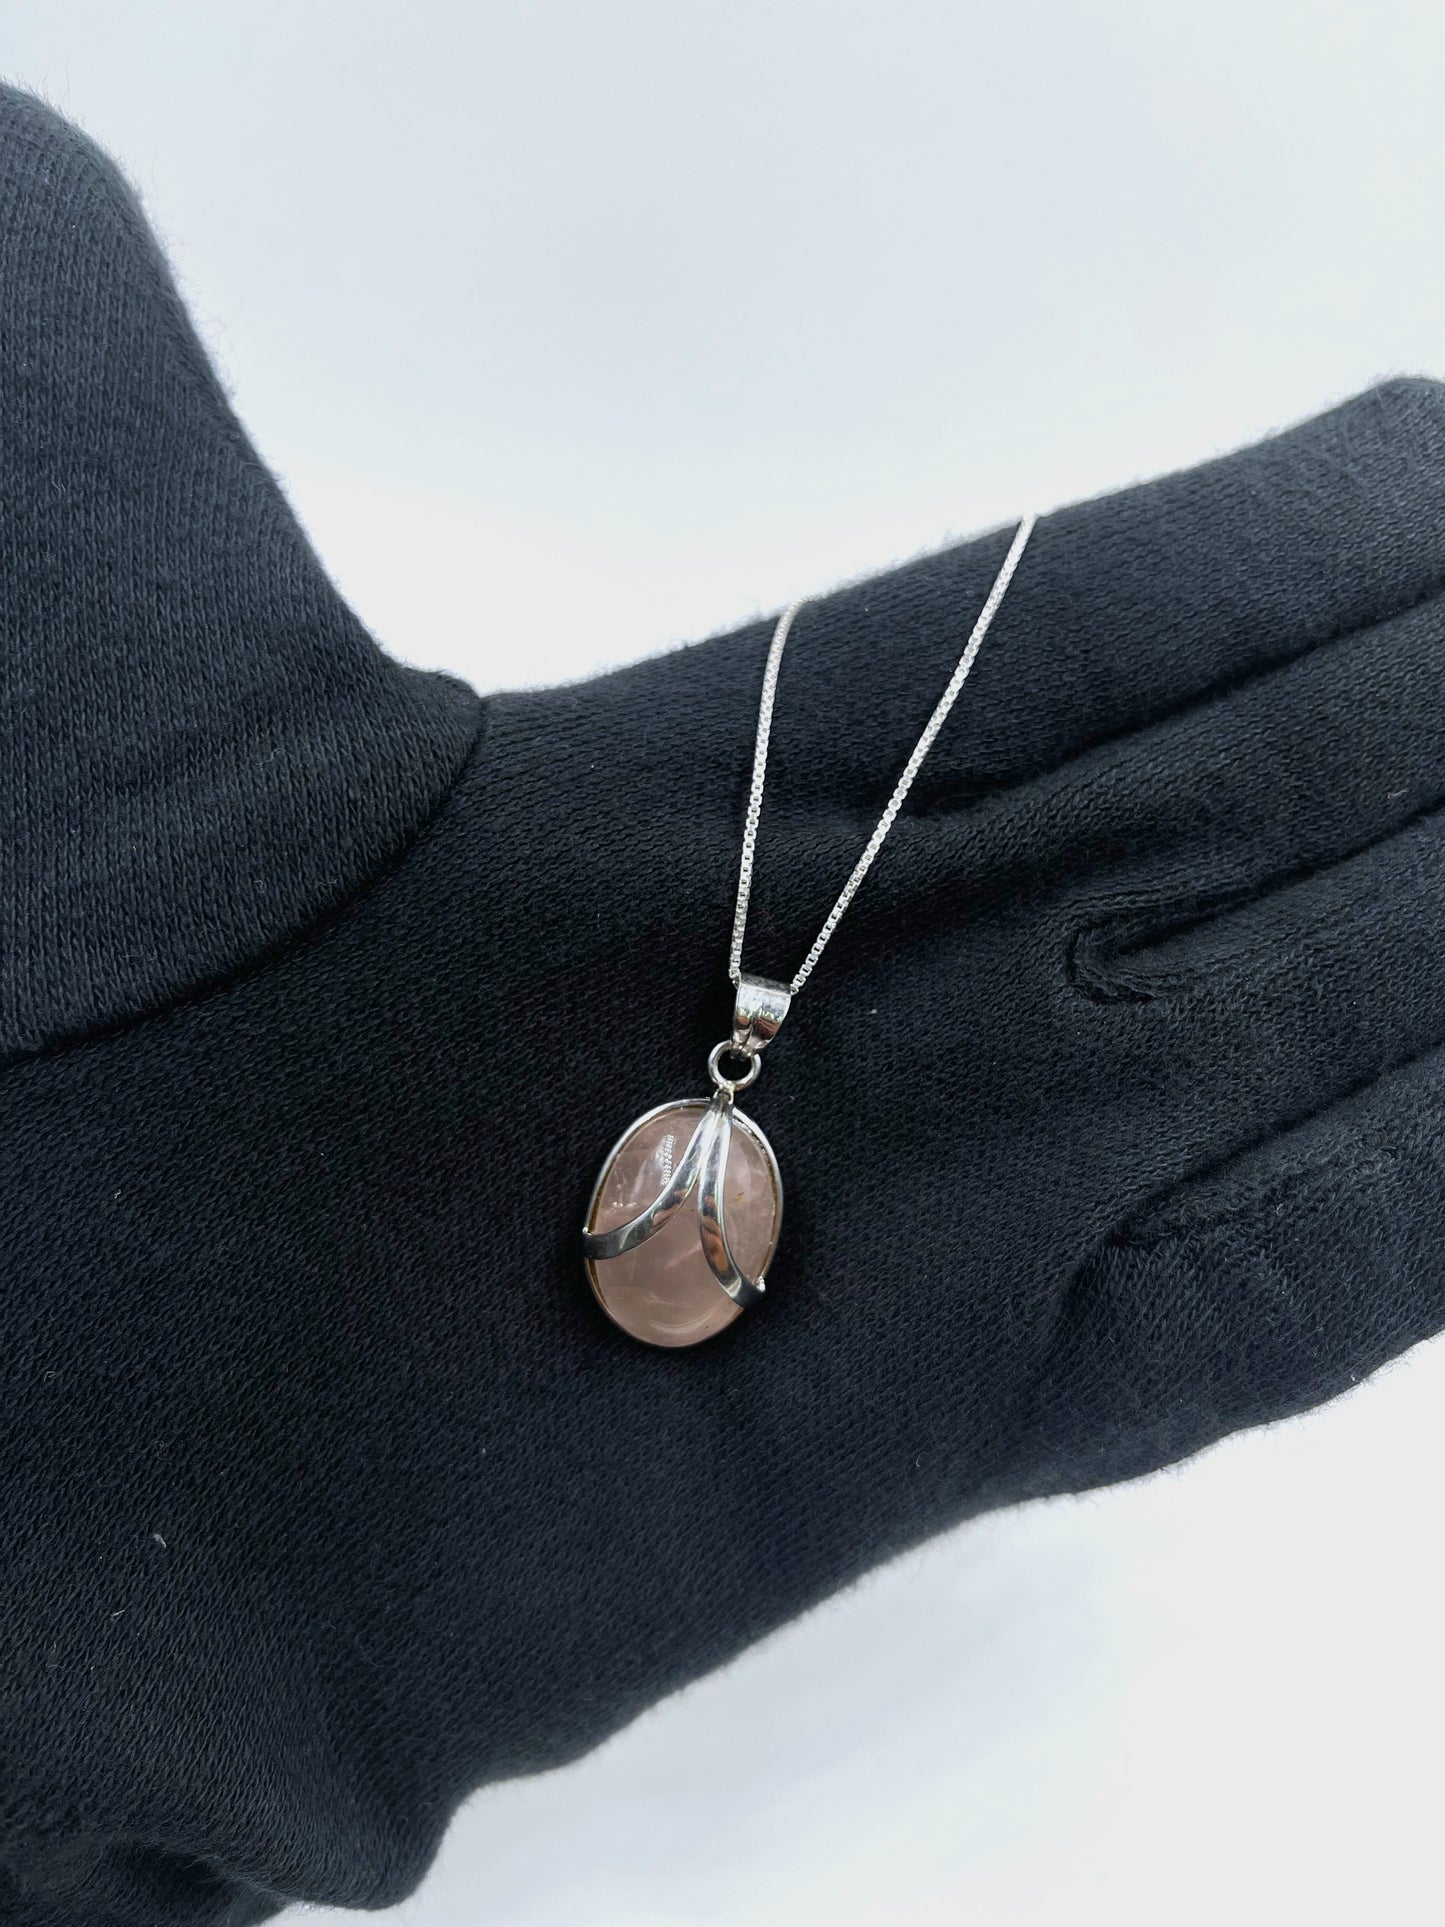 METALCARATS Metal Carats Rose Quartz Overal Setting in 925 Sterling Silver | Women | Overlap Pattern | Sublte and Minimalistic